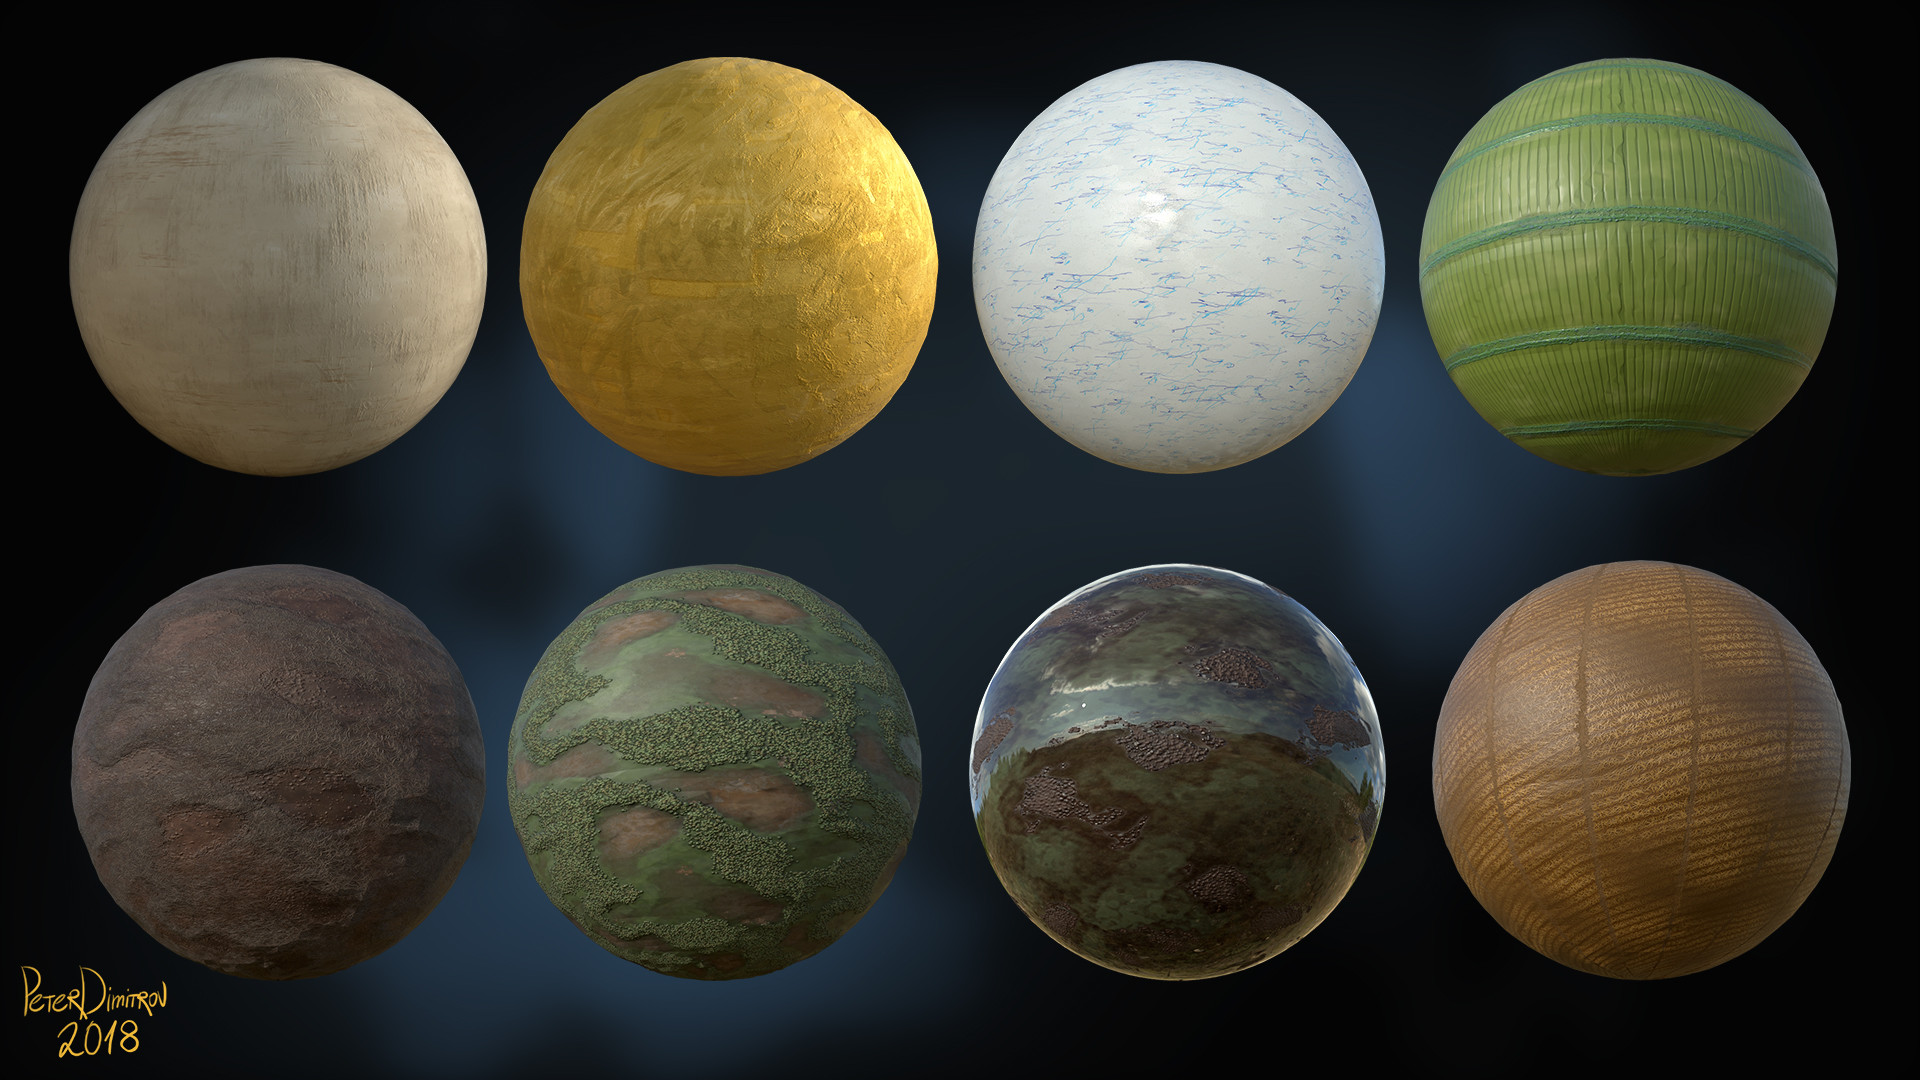 Material callout sheet one. Shows 8 UV spheres rendered from inside Substance Designer. In order of appearance: paper, gold leaf, ceramic, bamboo, ground mud, ground mud mossy, ground mud wet, hay.